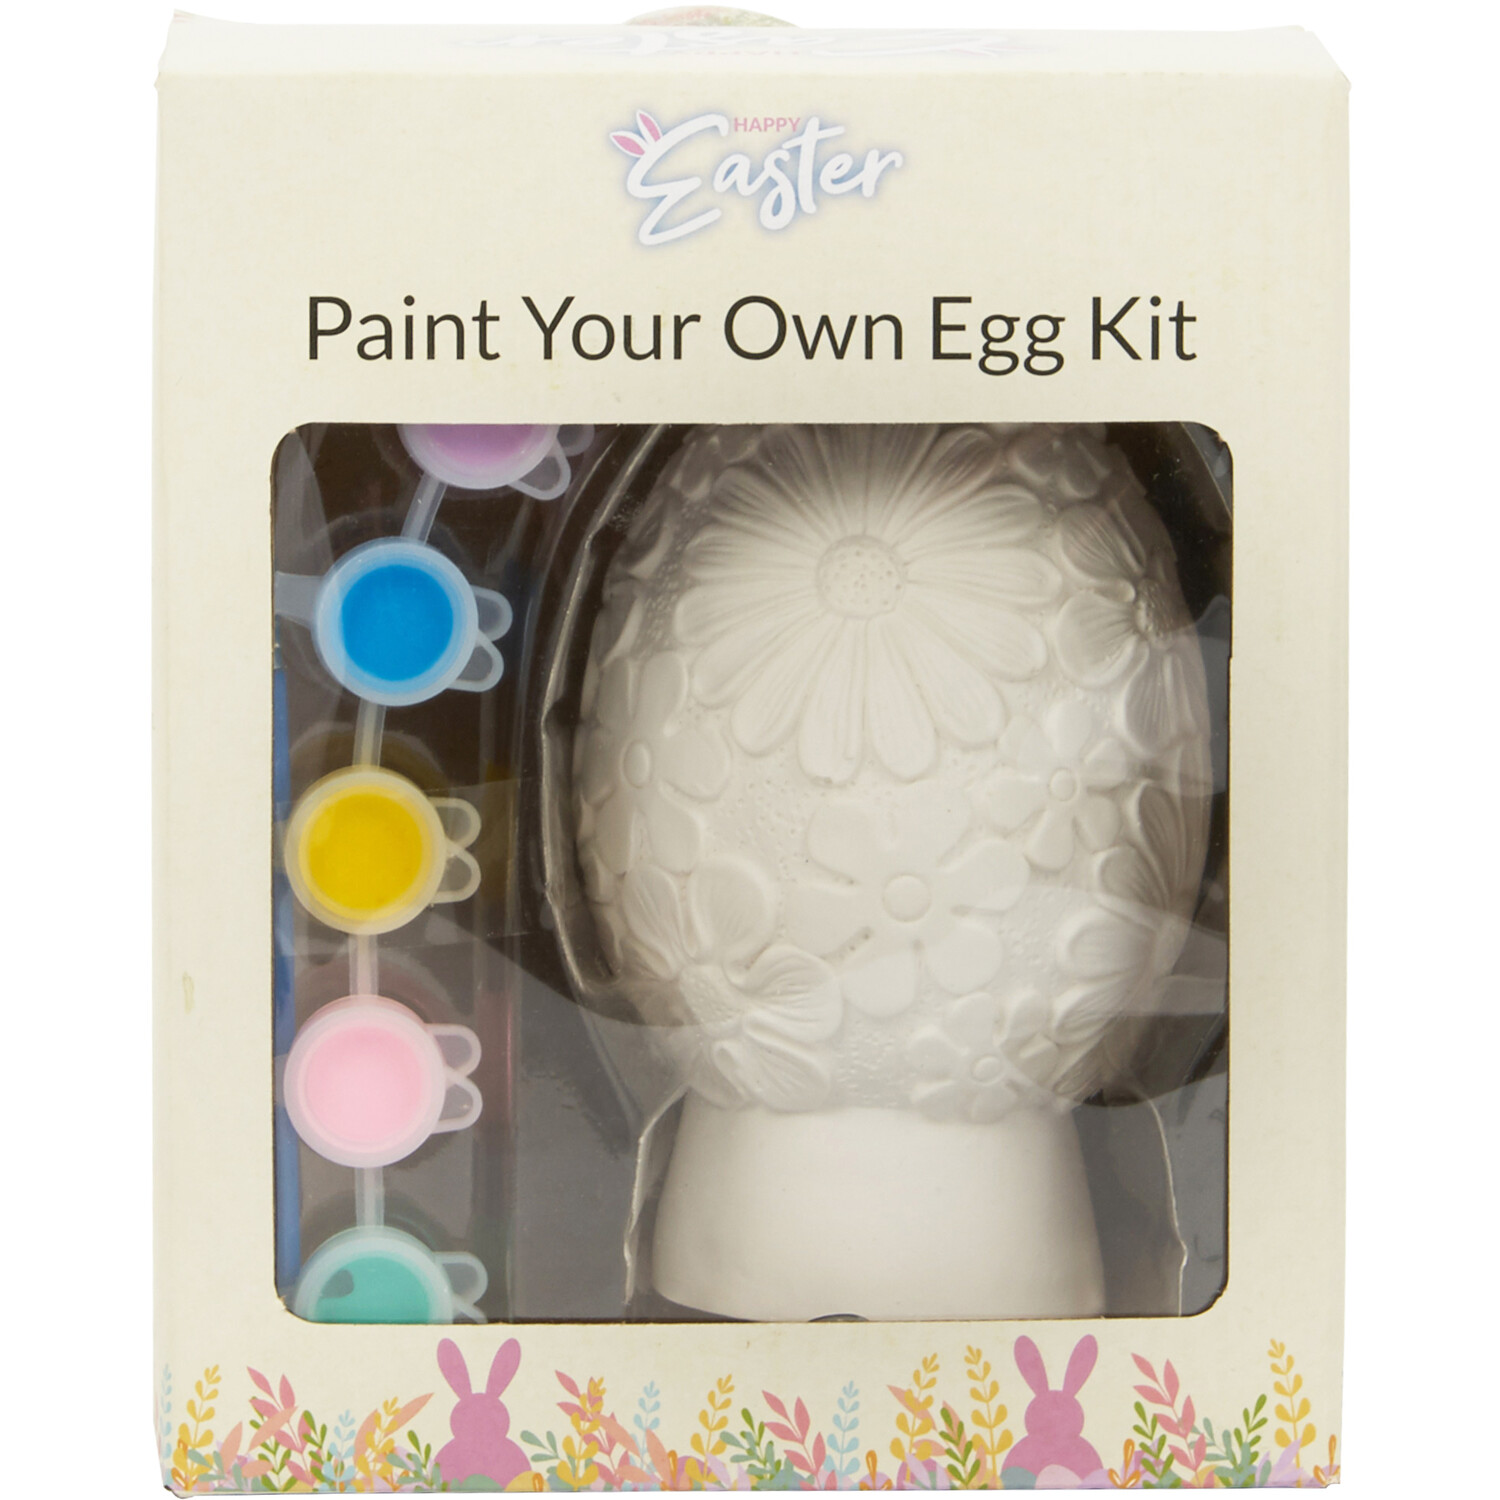 Paint Your Own Egg Image 1